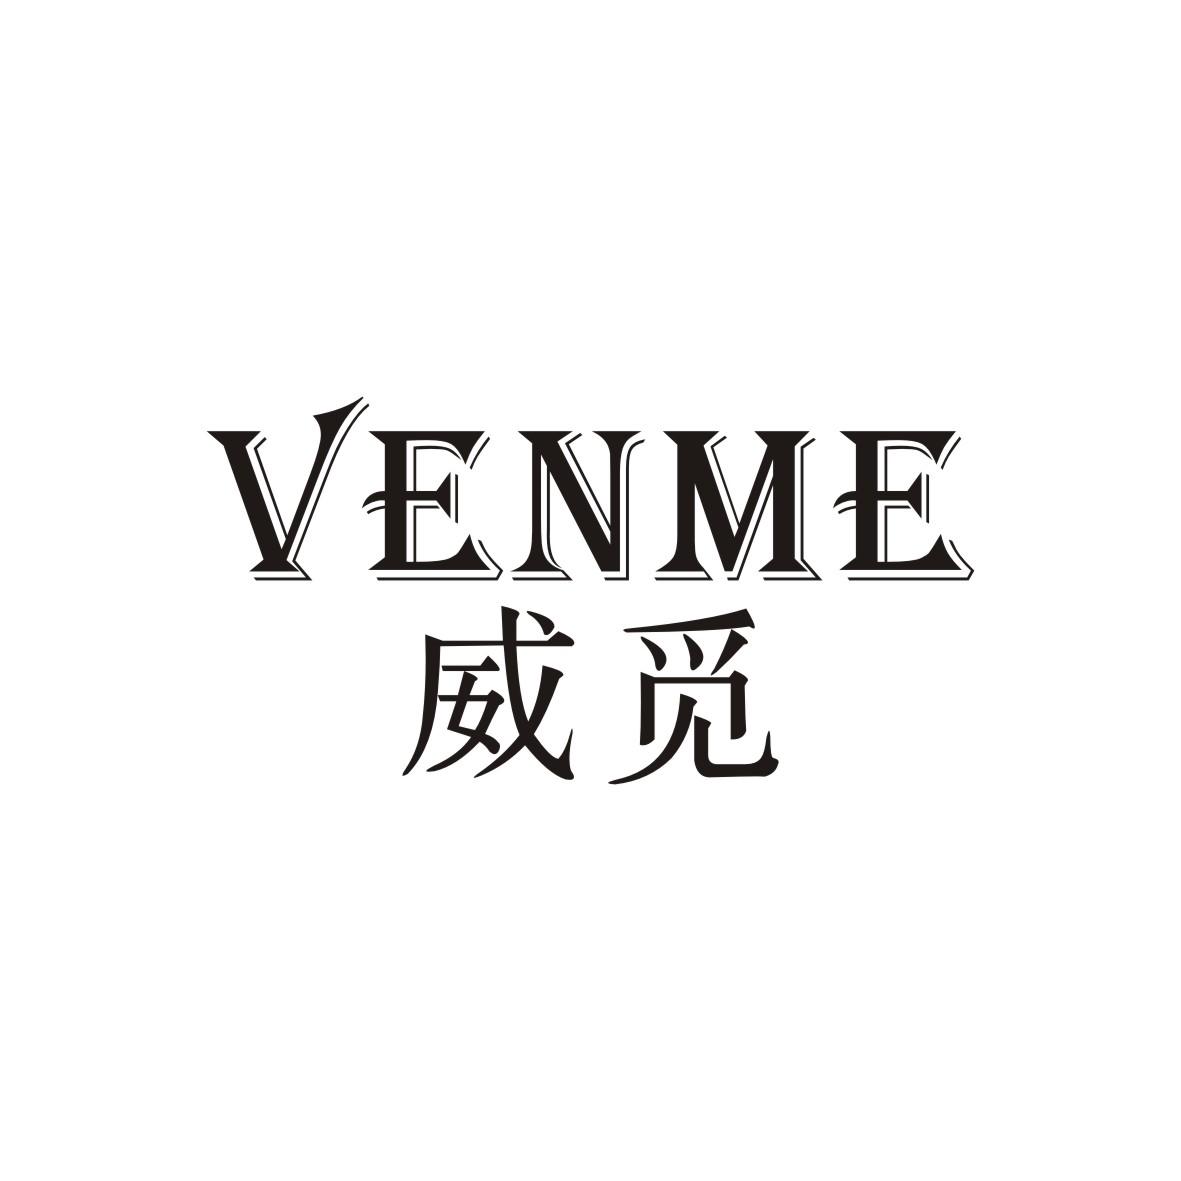  VENME